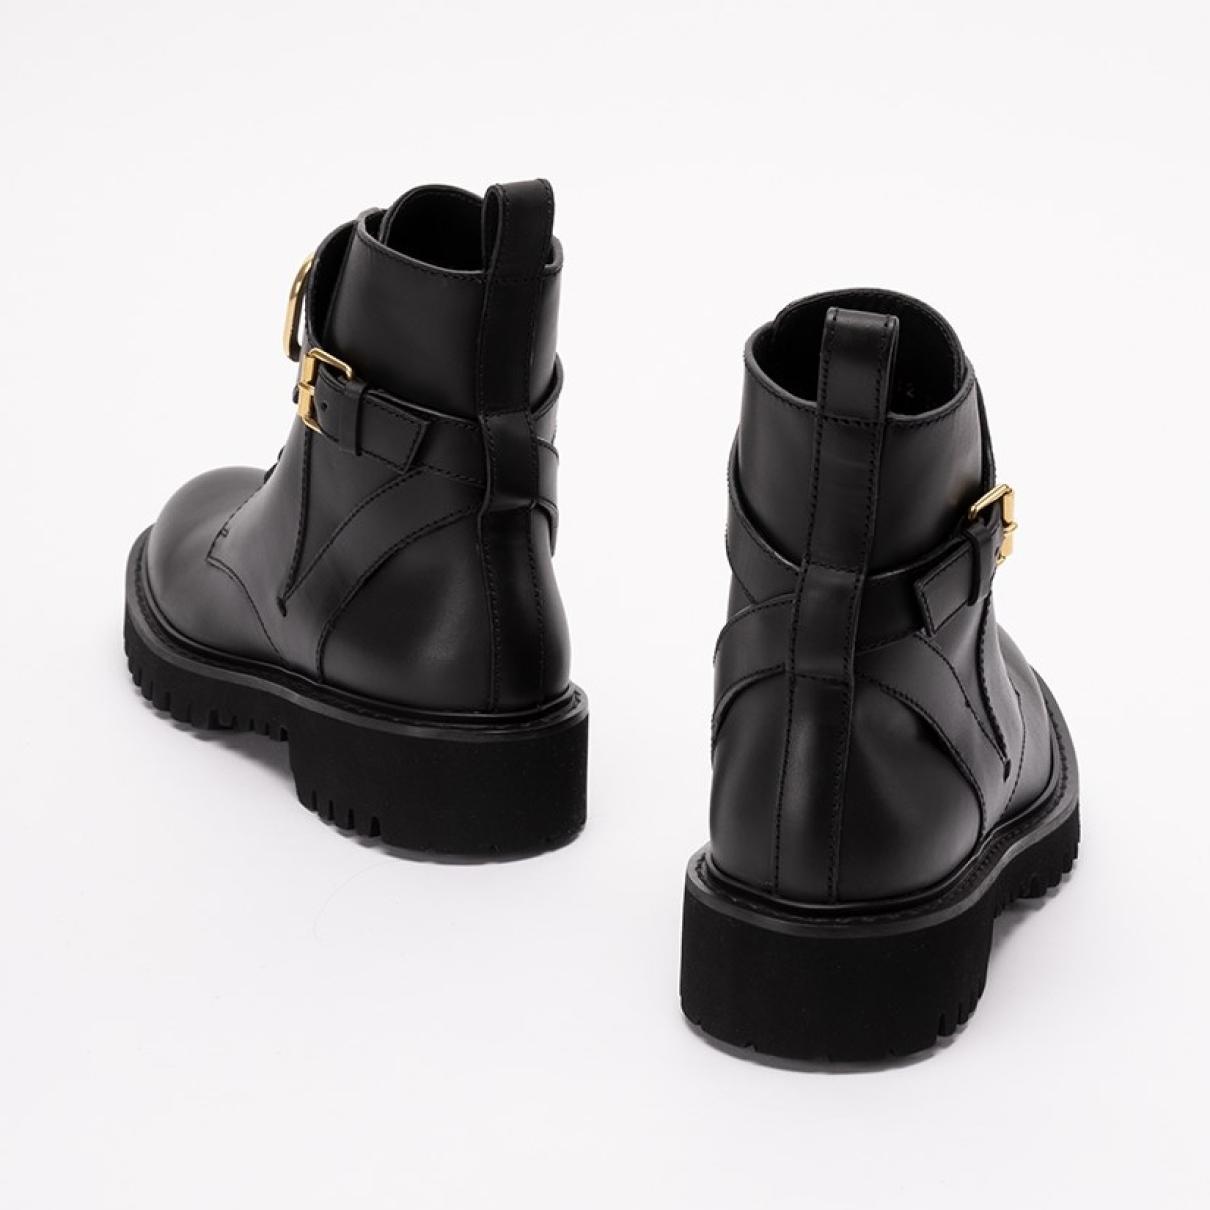 VLogo leather boots - 5